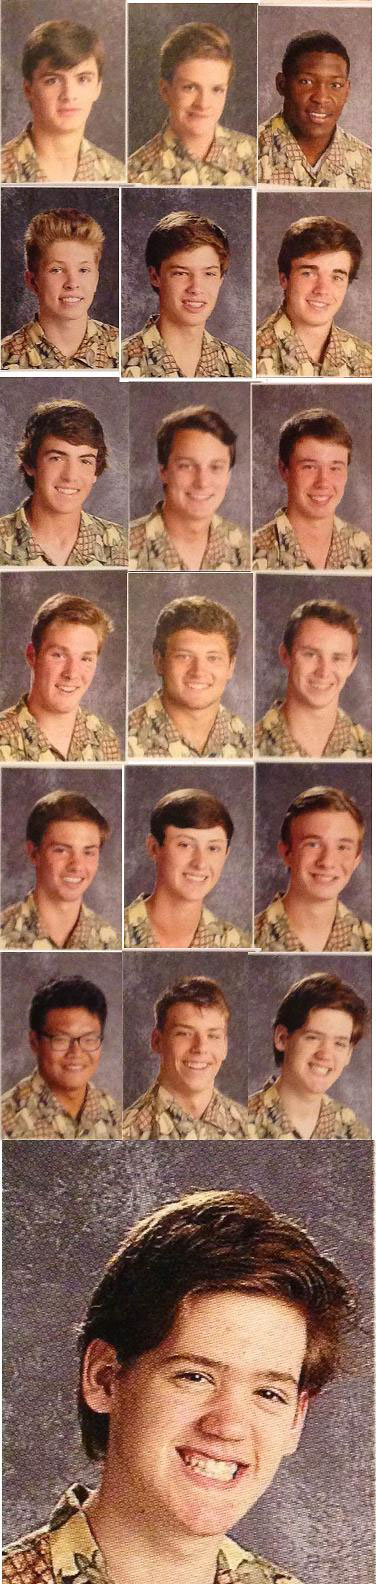 arkansas high school students pass around pineapple shirt for picture day (5)